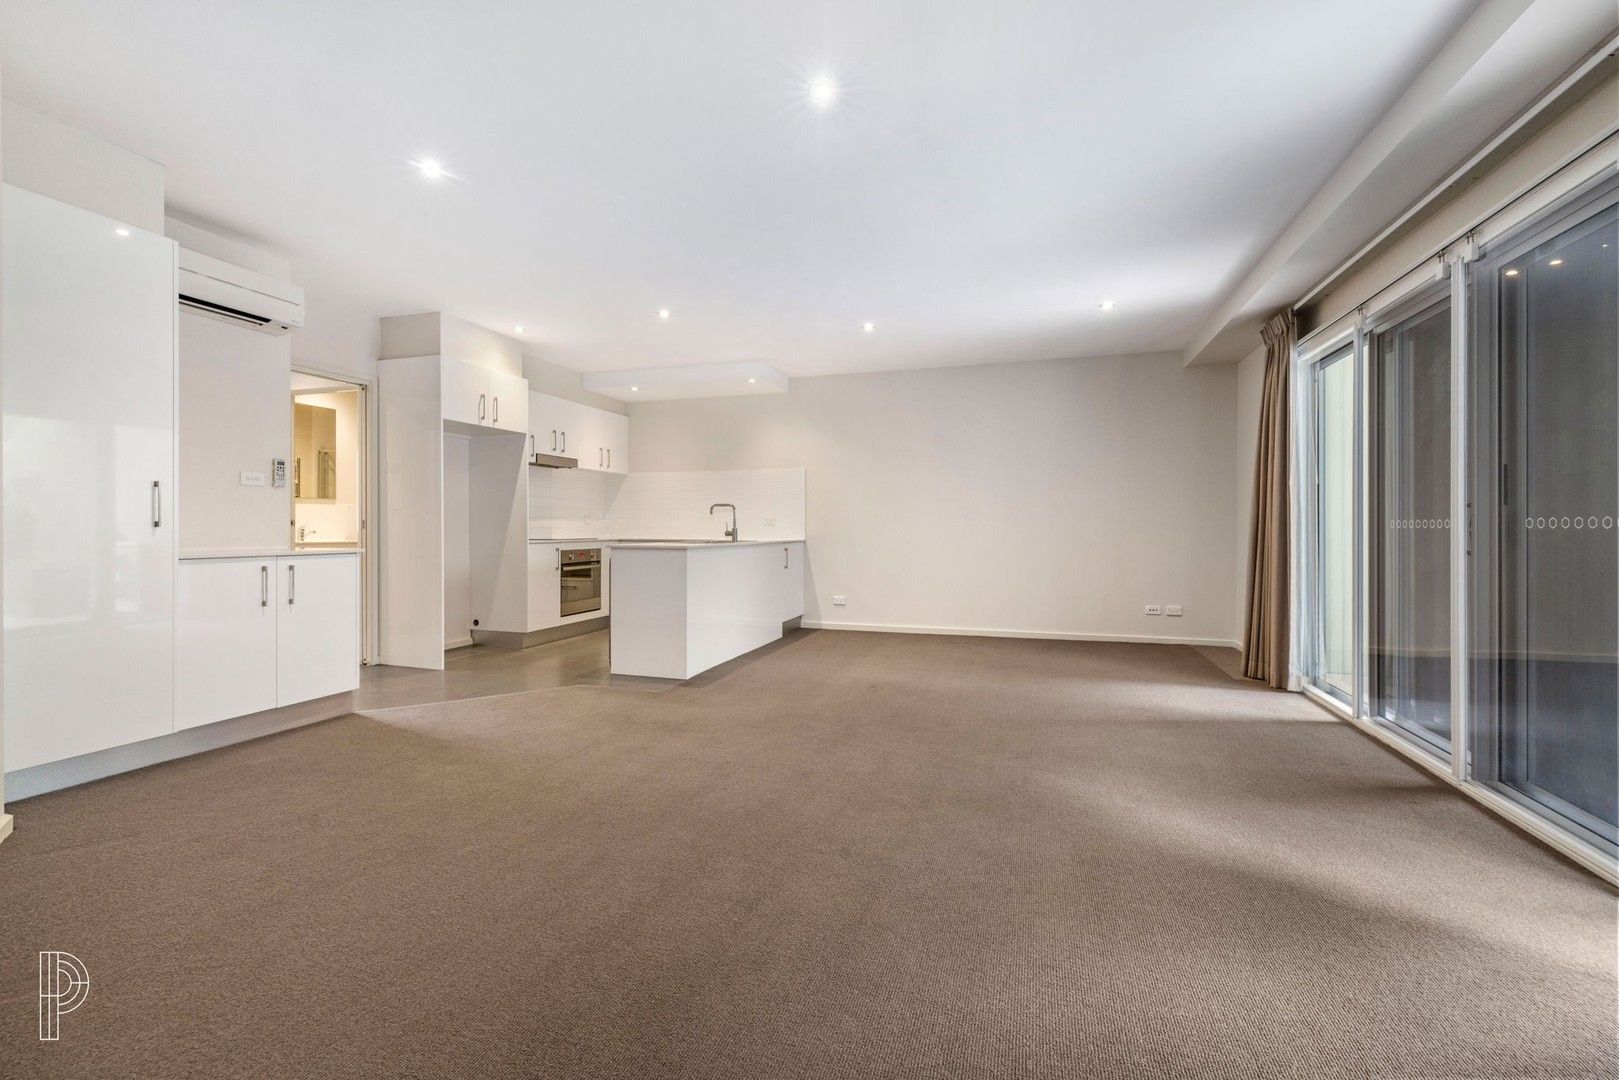 1 bedrooms Apartment / Unit / Flat in 2/15 Strangways Street CURTIN ACT, 2605